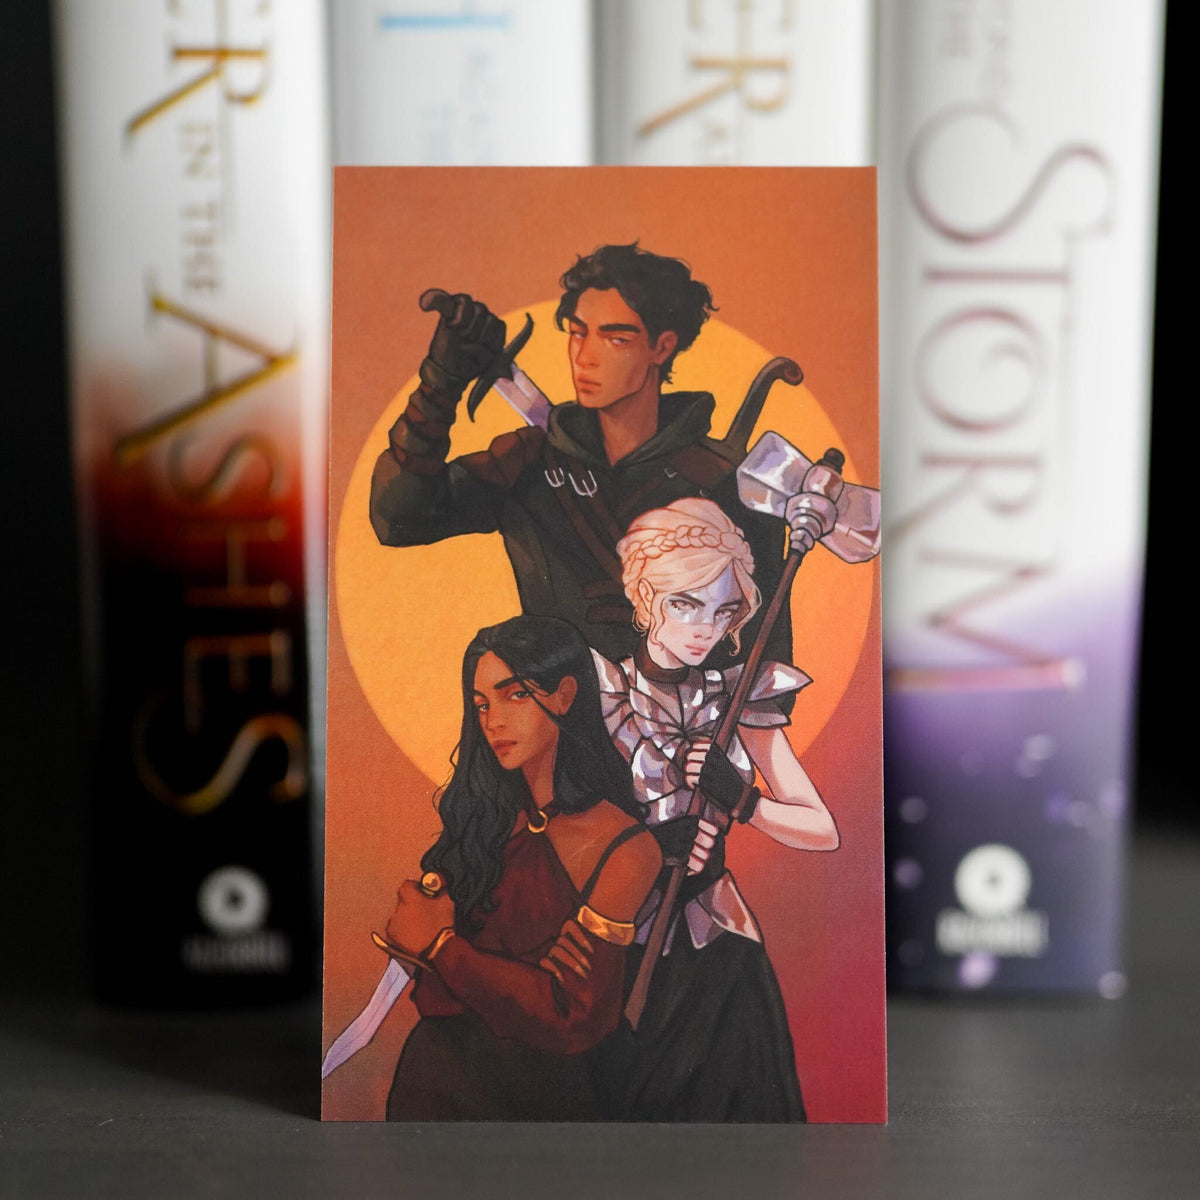 An Ember in the Ashes Adventure Card features Laia, Elias, and Helene holding weapons with character details on the back.